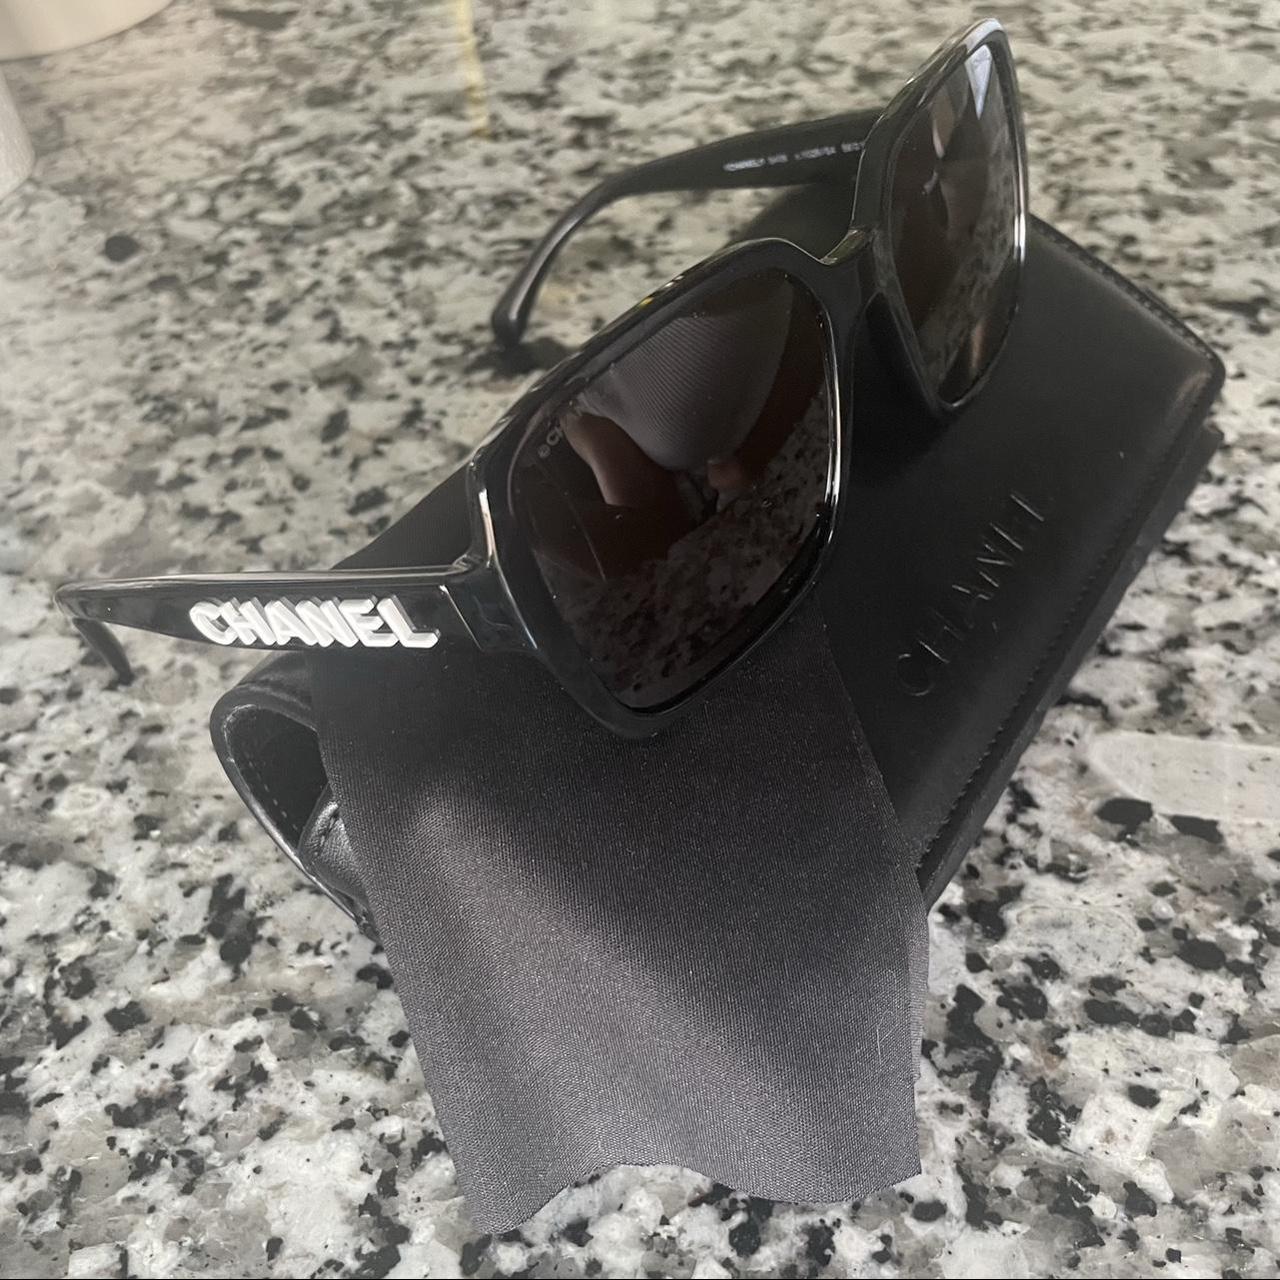 CHANEL sunglasses, Brand new w/o tags, Comes with case